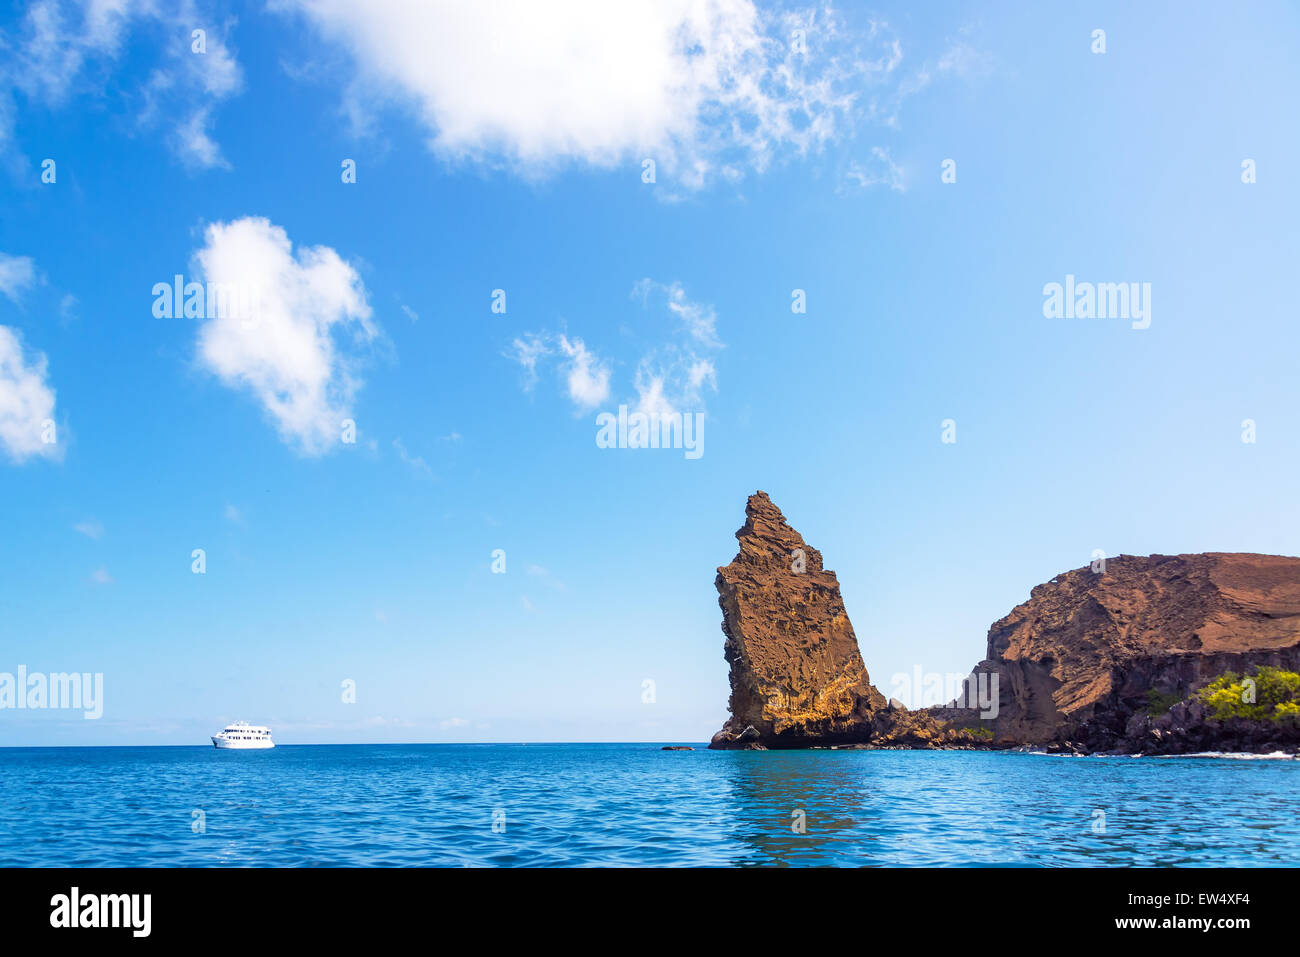 View of Pinnacle Rock with a ship to the left of it in the Galapagos Islands Stock Photo